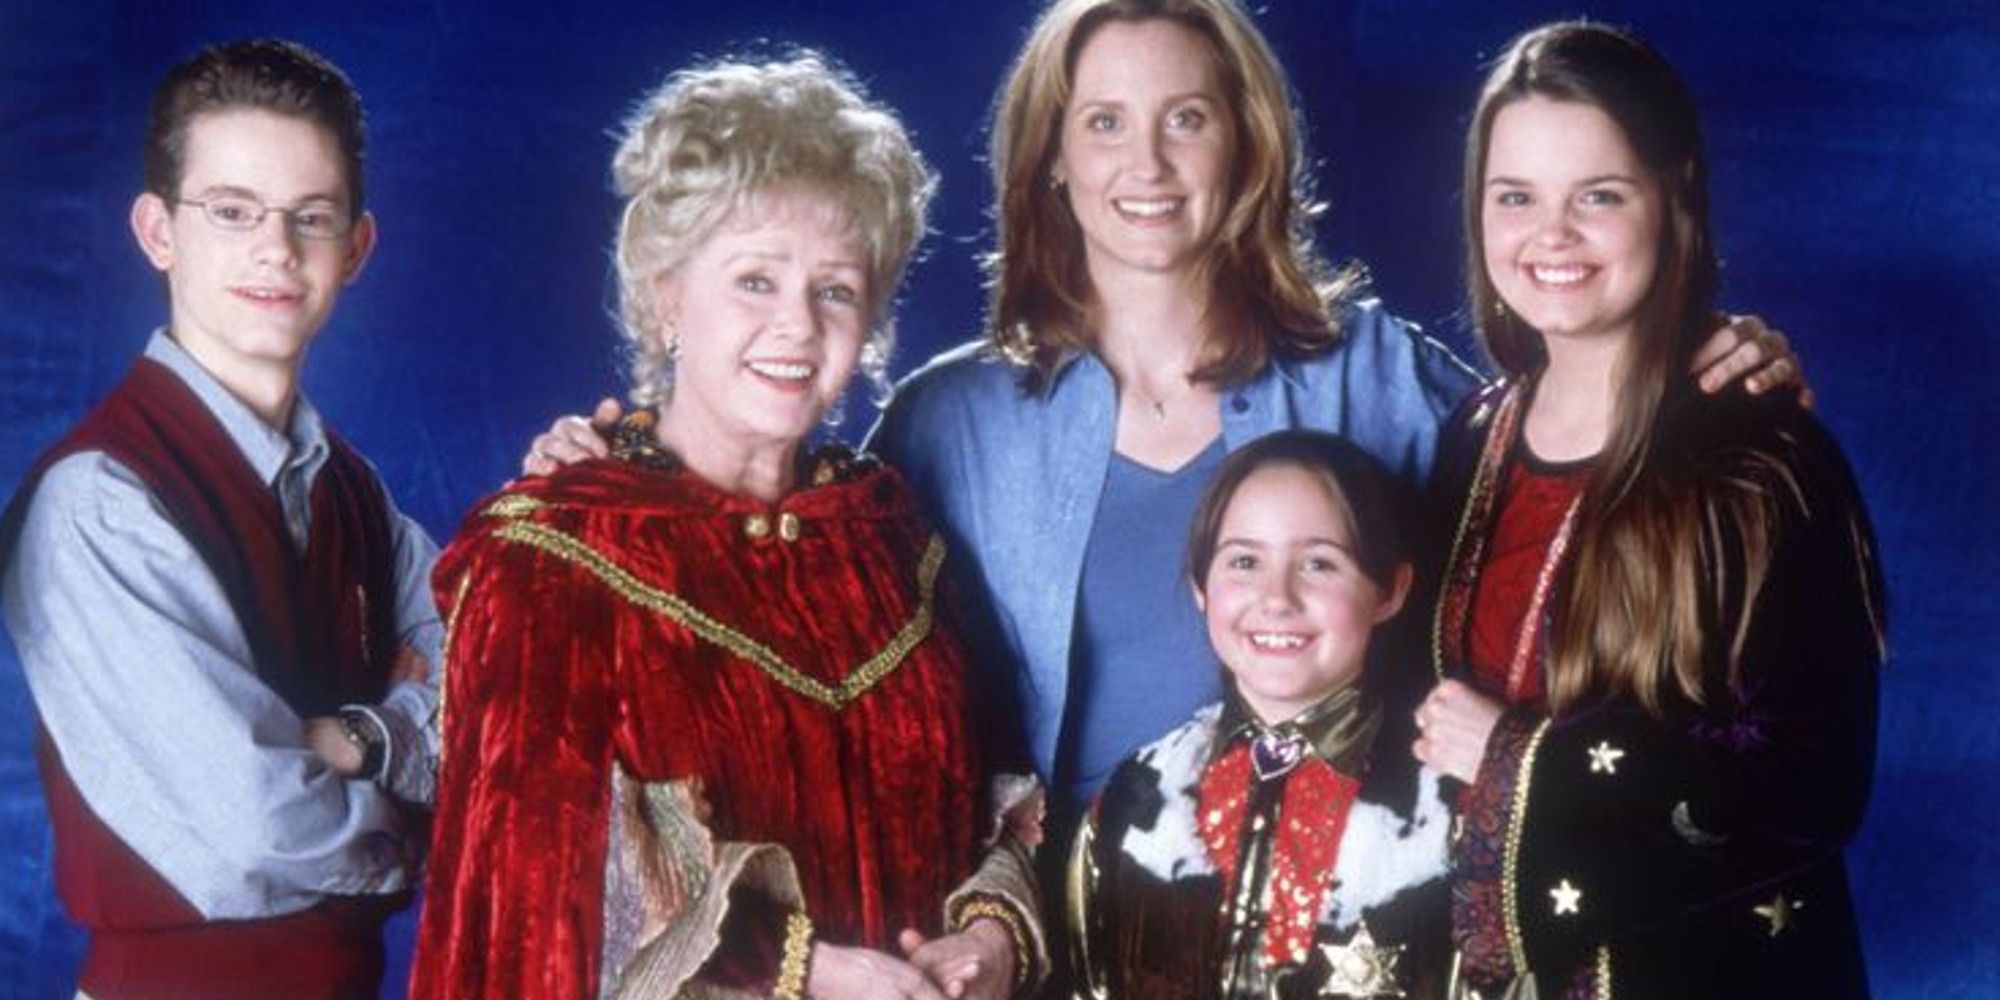 Dylan, Aggie, Gwen, Sophie, and Marnie from Halloweentown